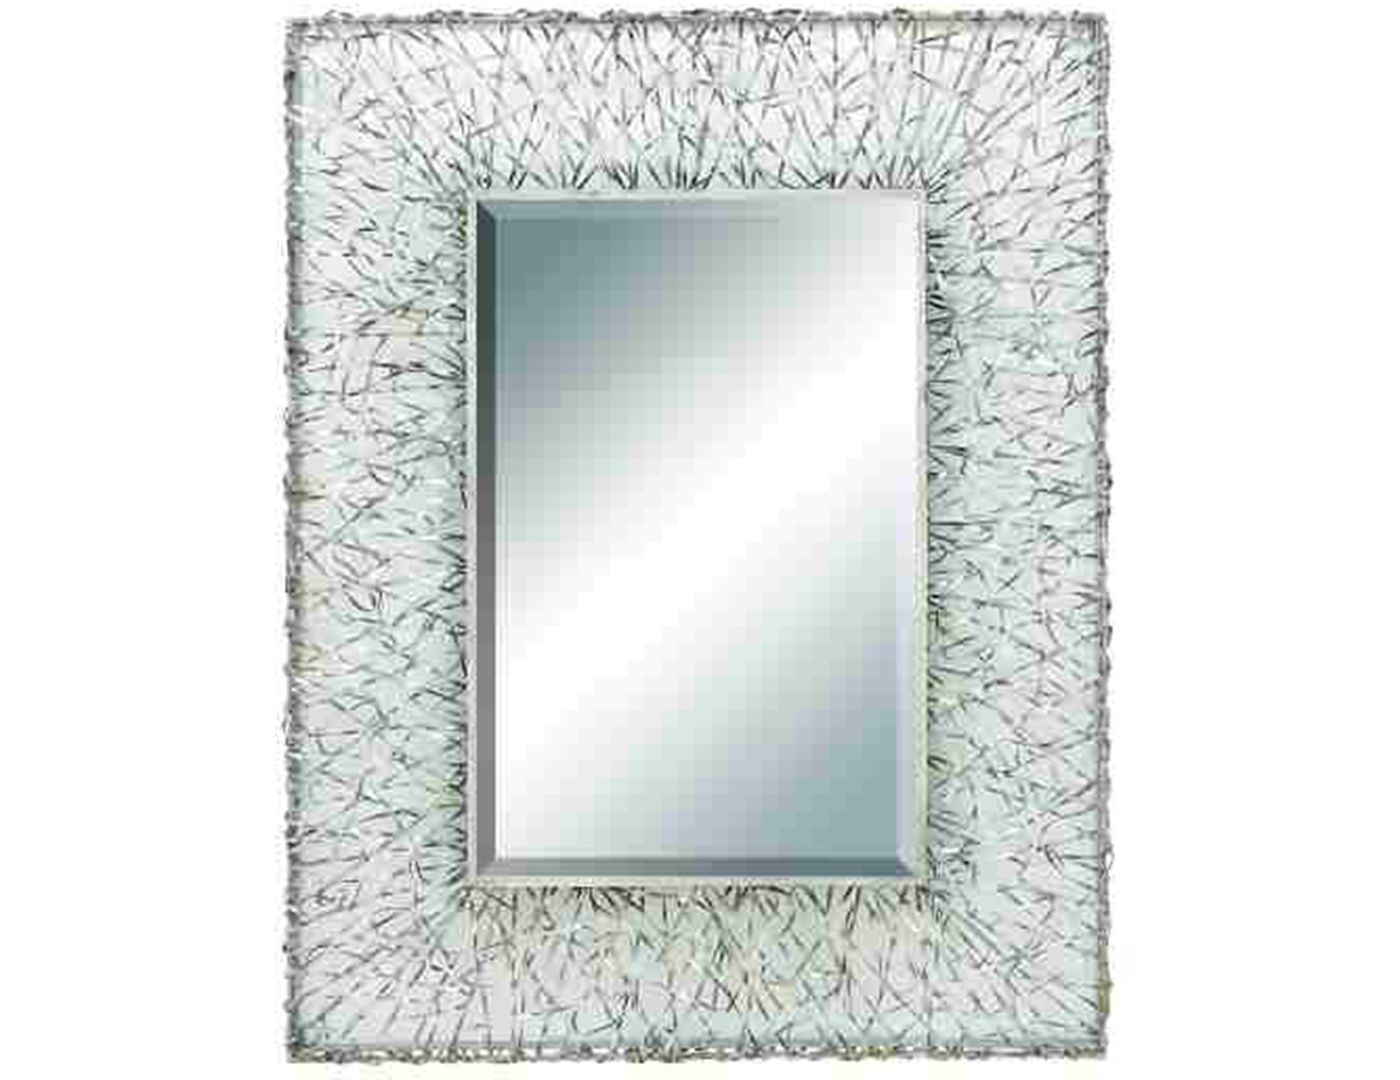 Woven Metal Mirror 32"w X 42"h | Steinhafels Throughout Woven Bronze Metal Wall Mirrors (View 15 of 15)